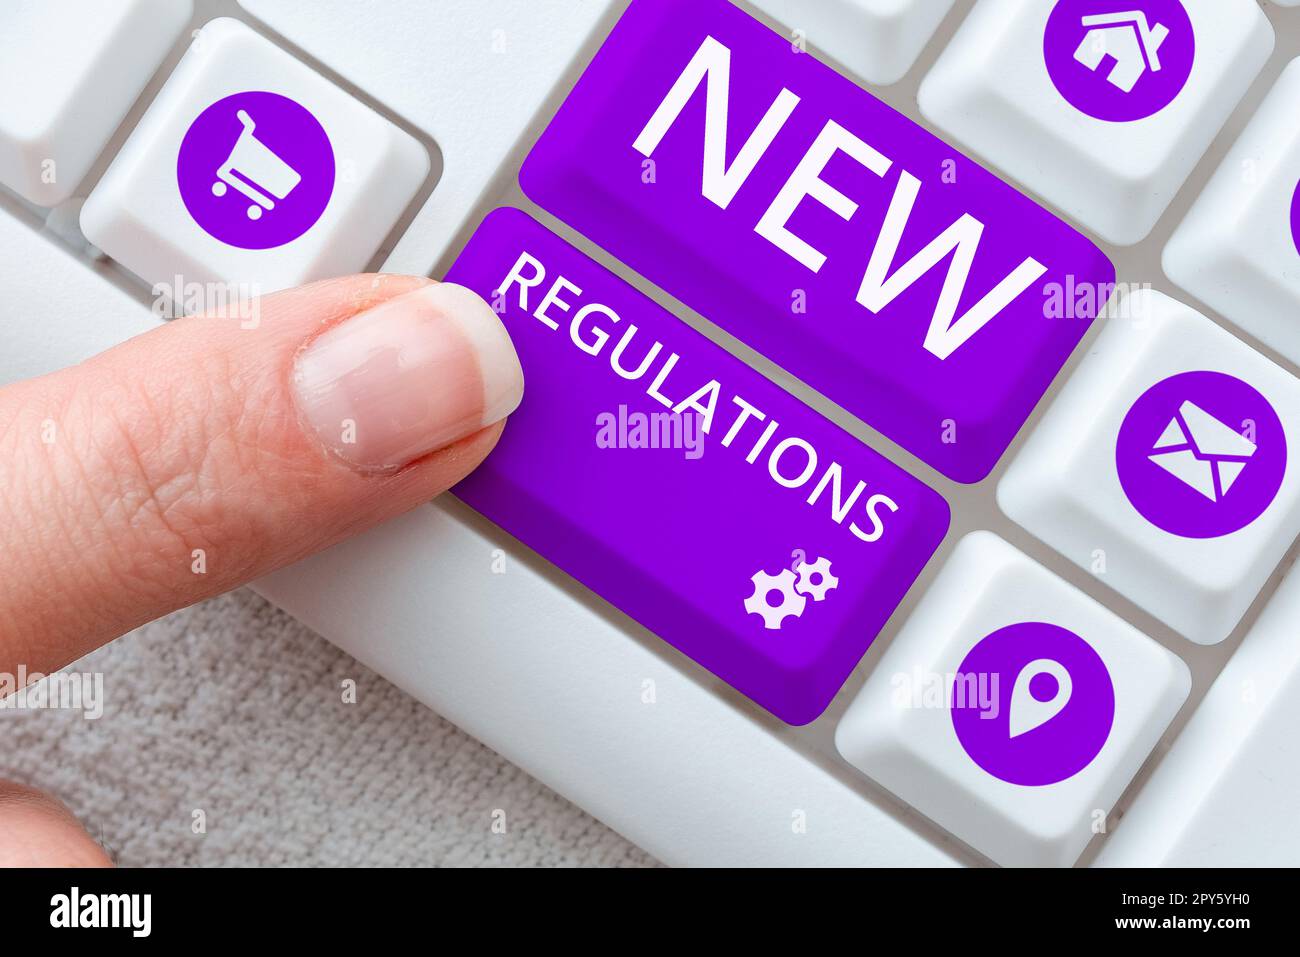 Text showing inspiration New Regulations. Business concept Regulation controlling the activity usually used by rules. Stock Photo